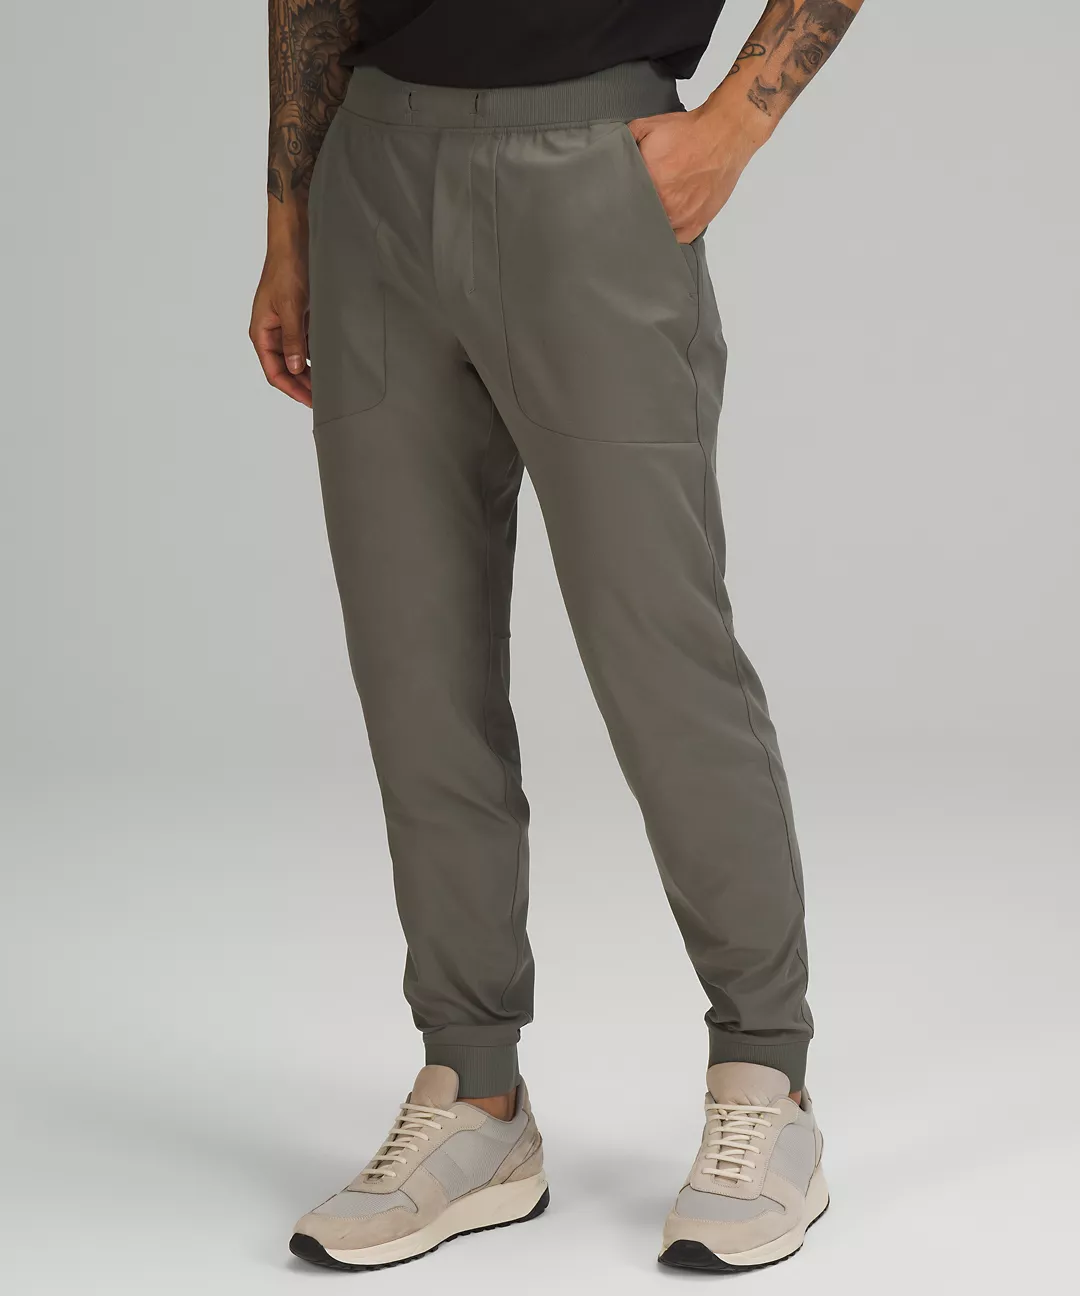 my new favorite  lululemon dupes sweatpants! they are just like